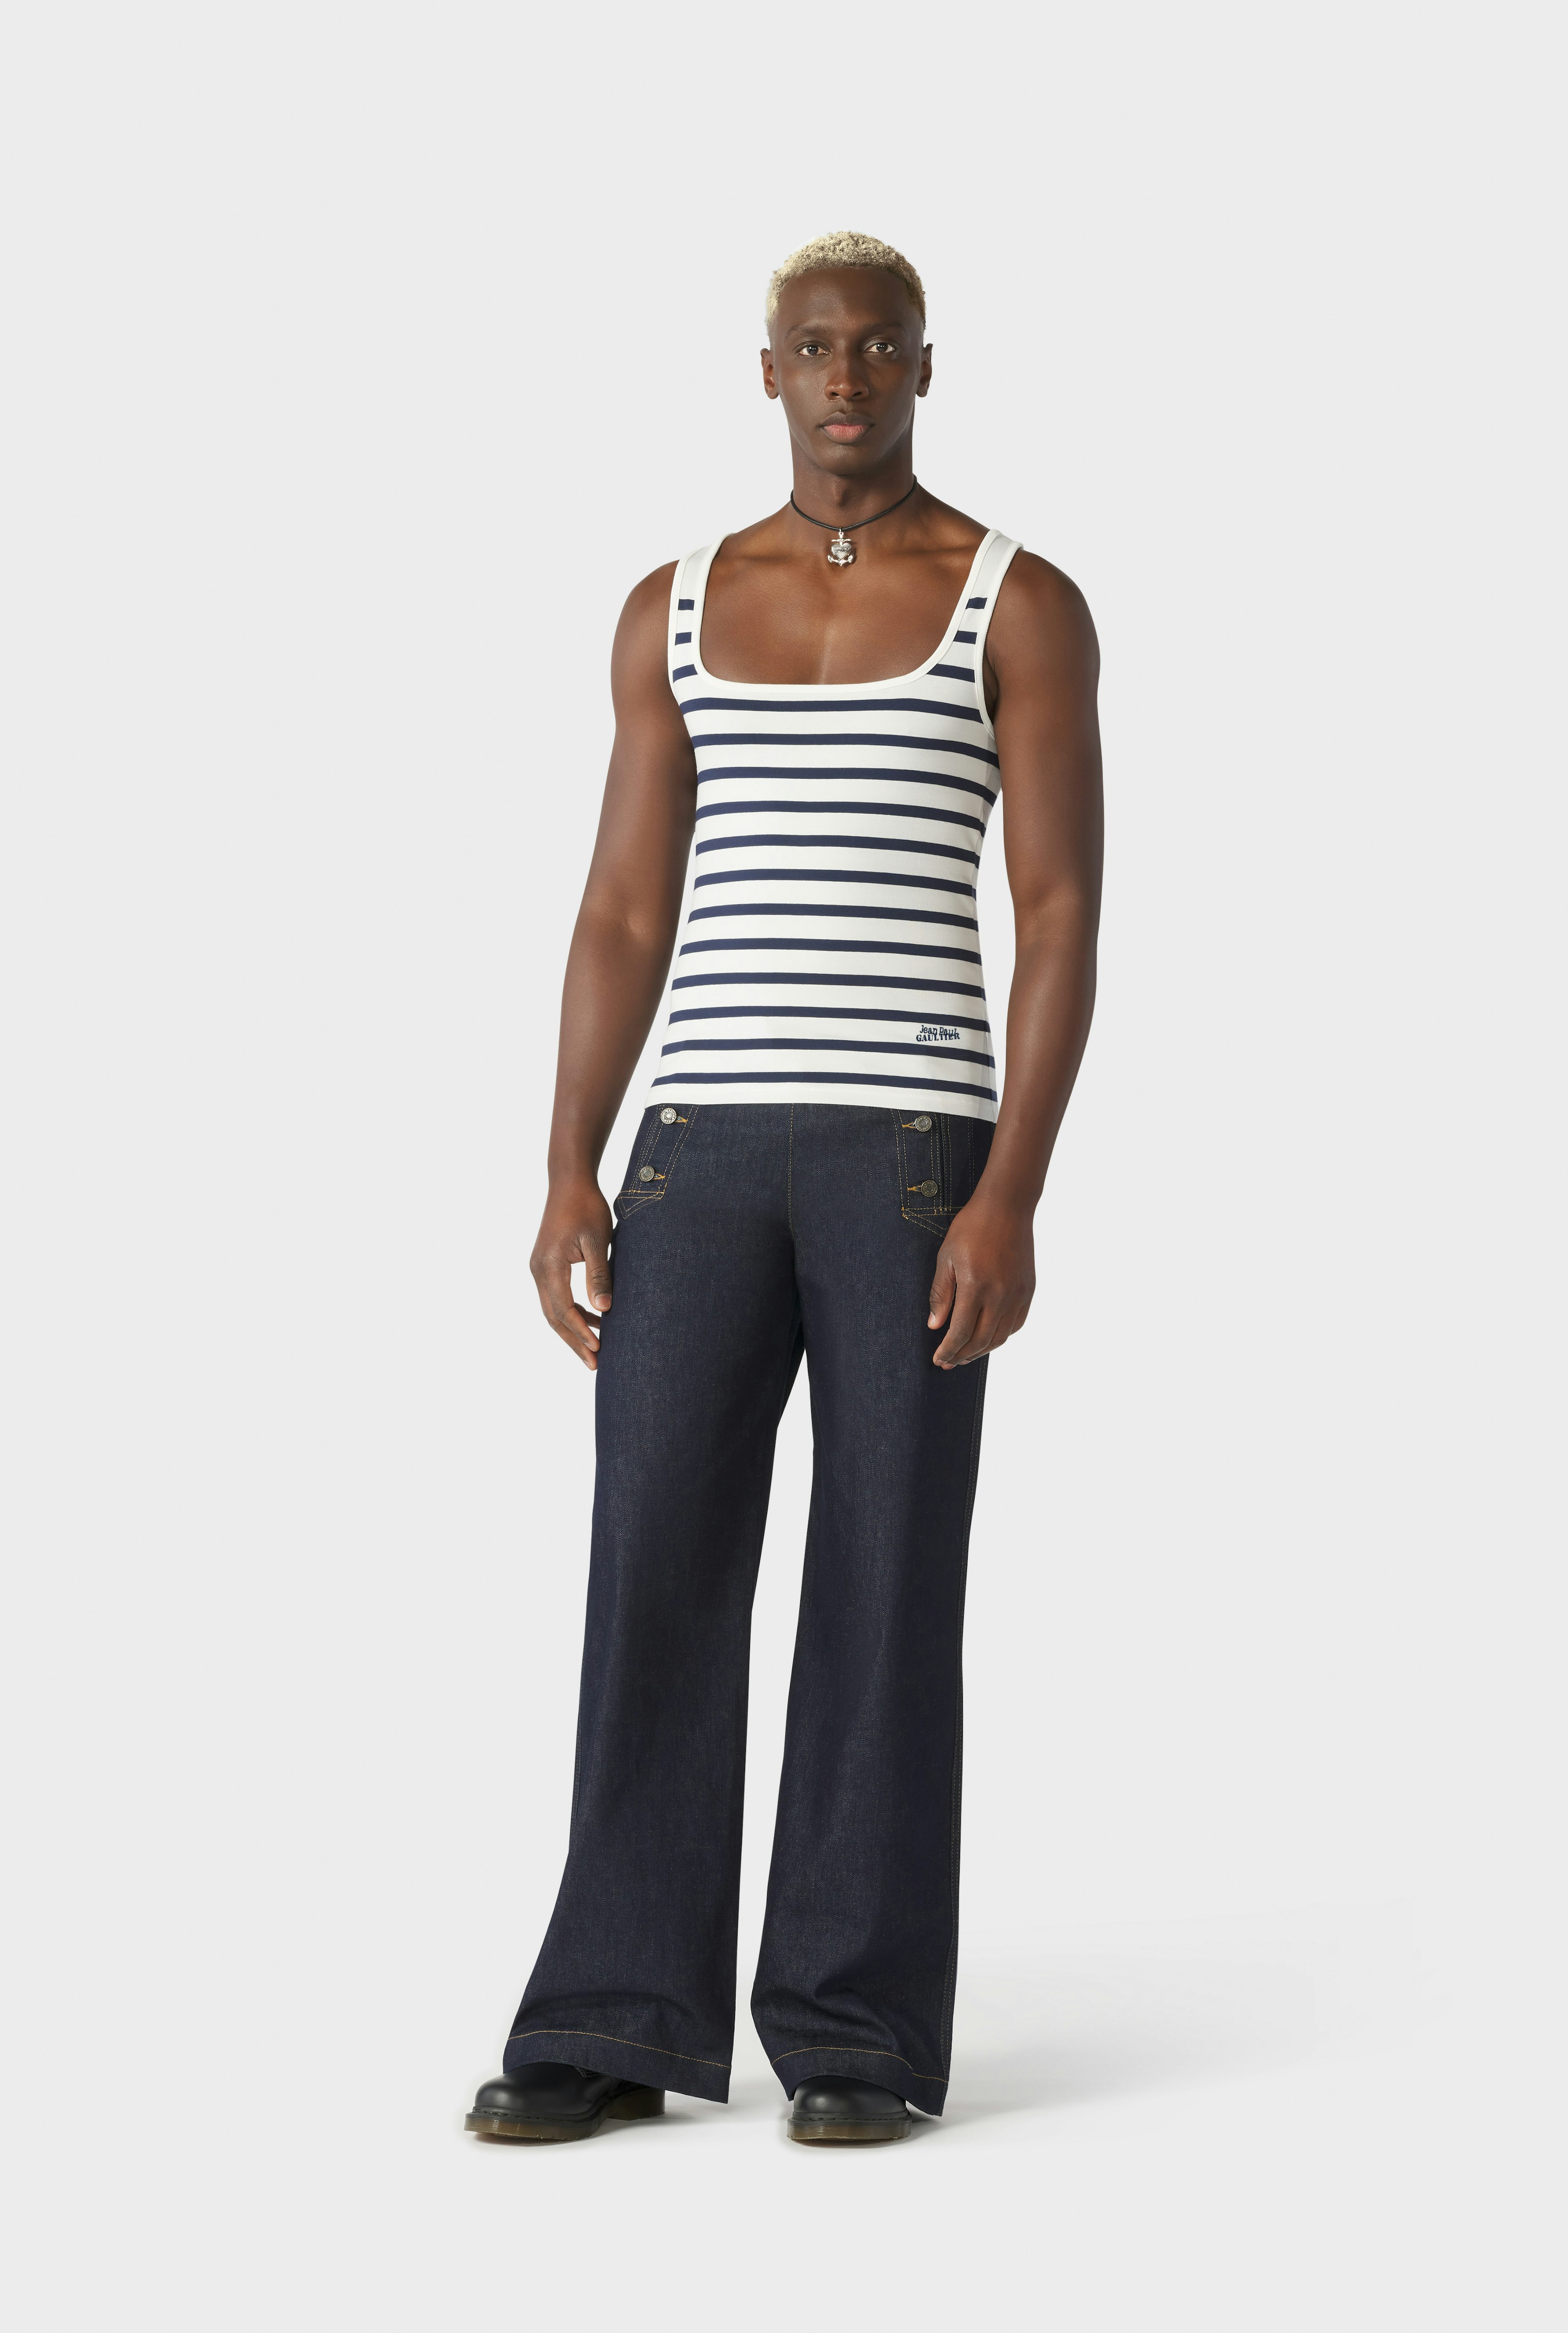 The Sailor Tank Top for Him